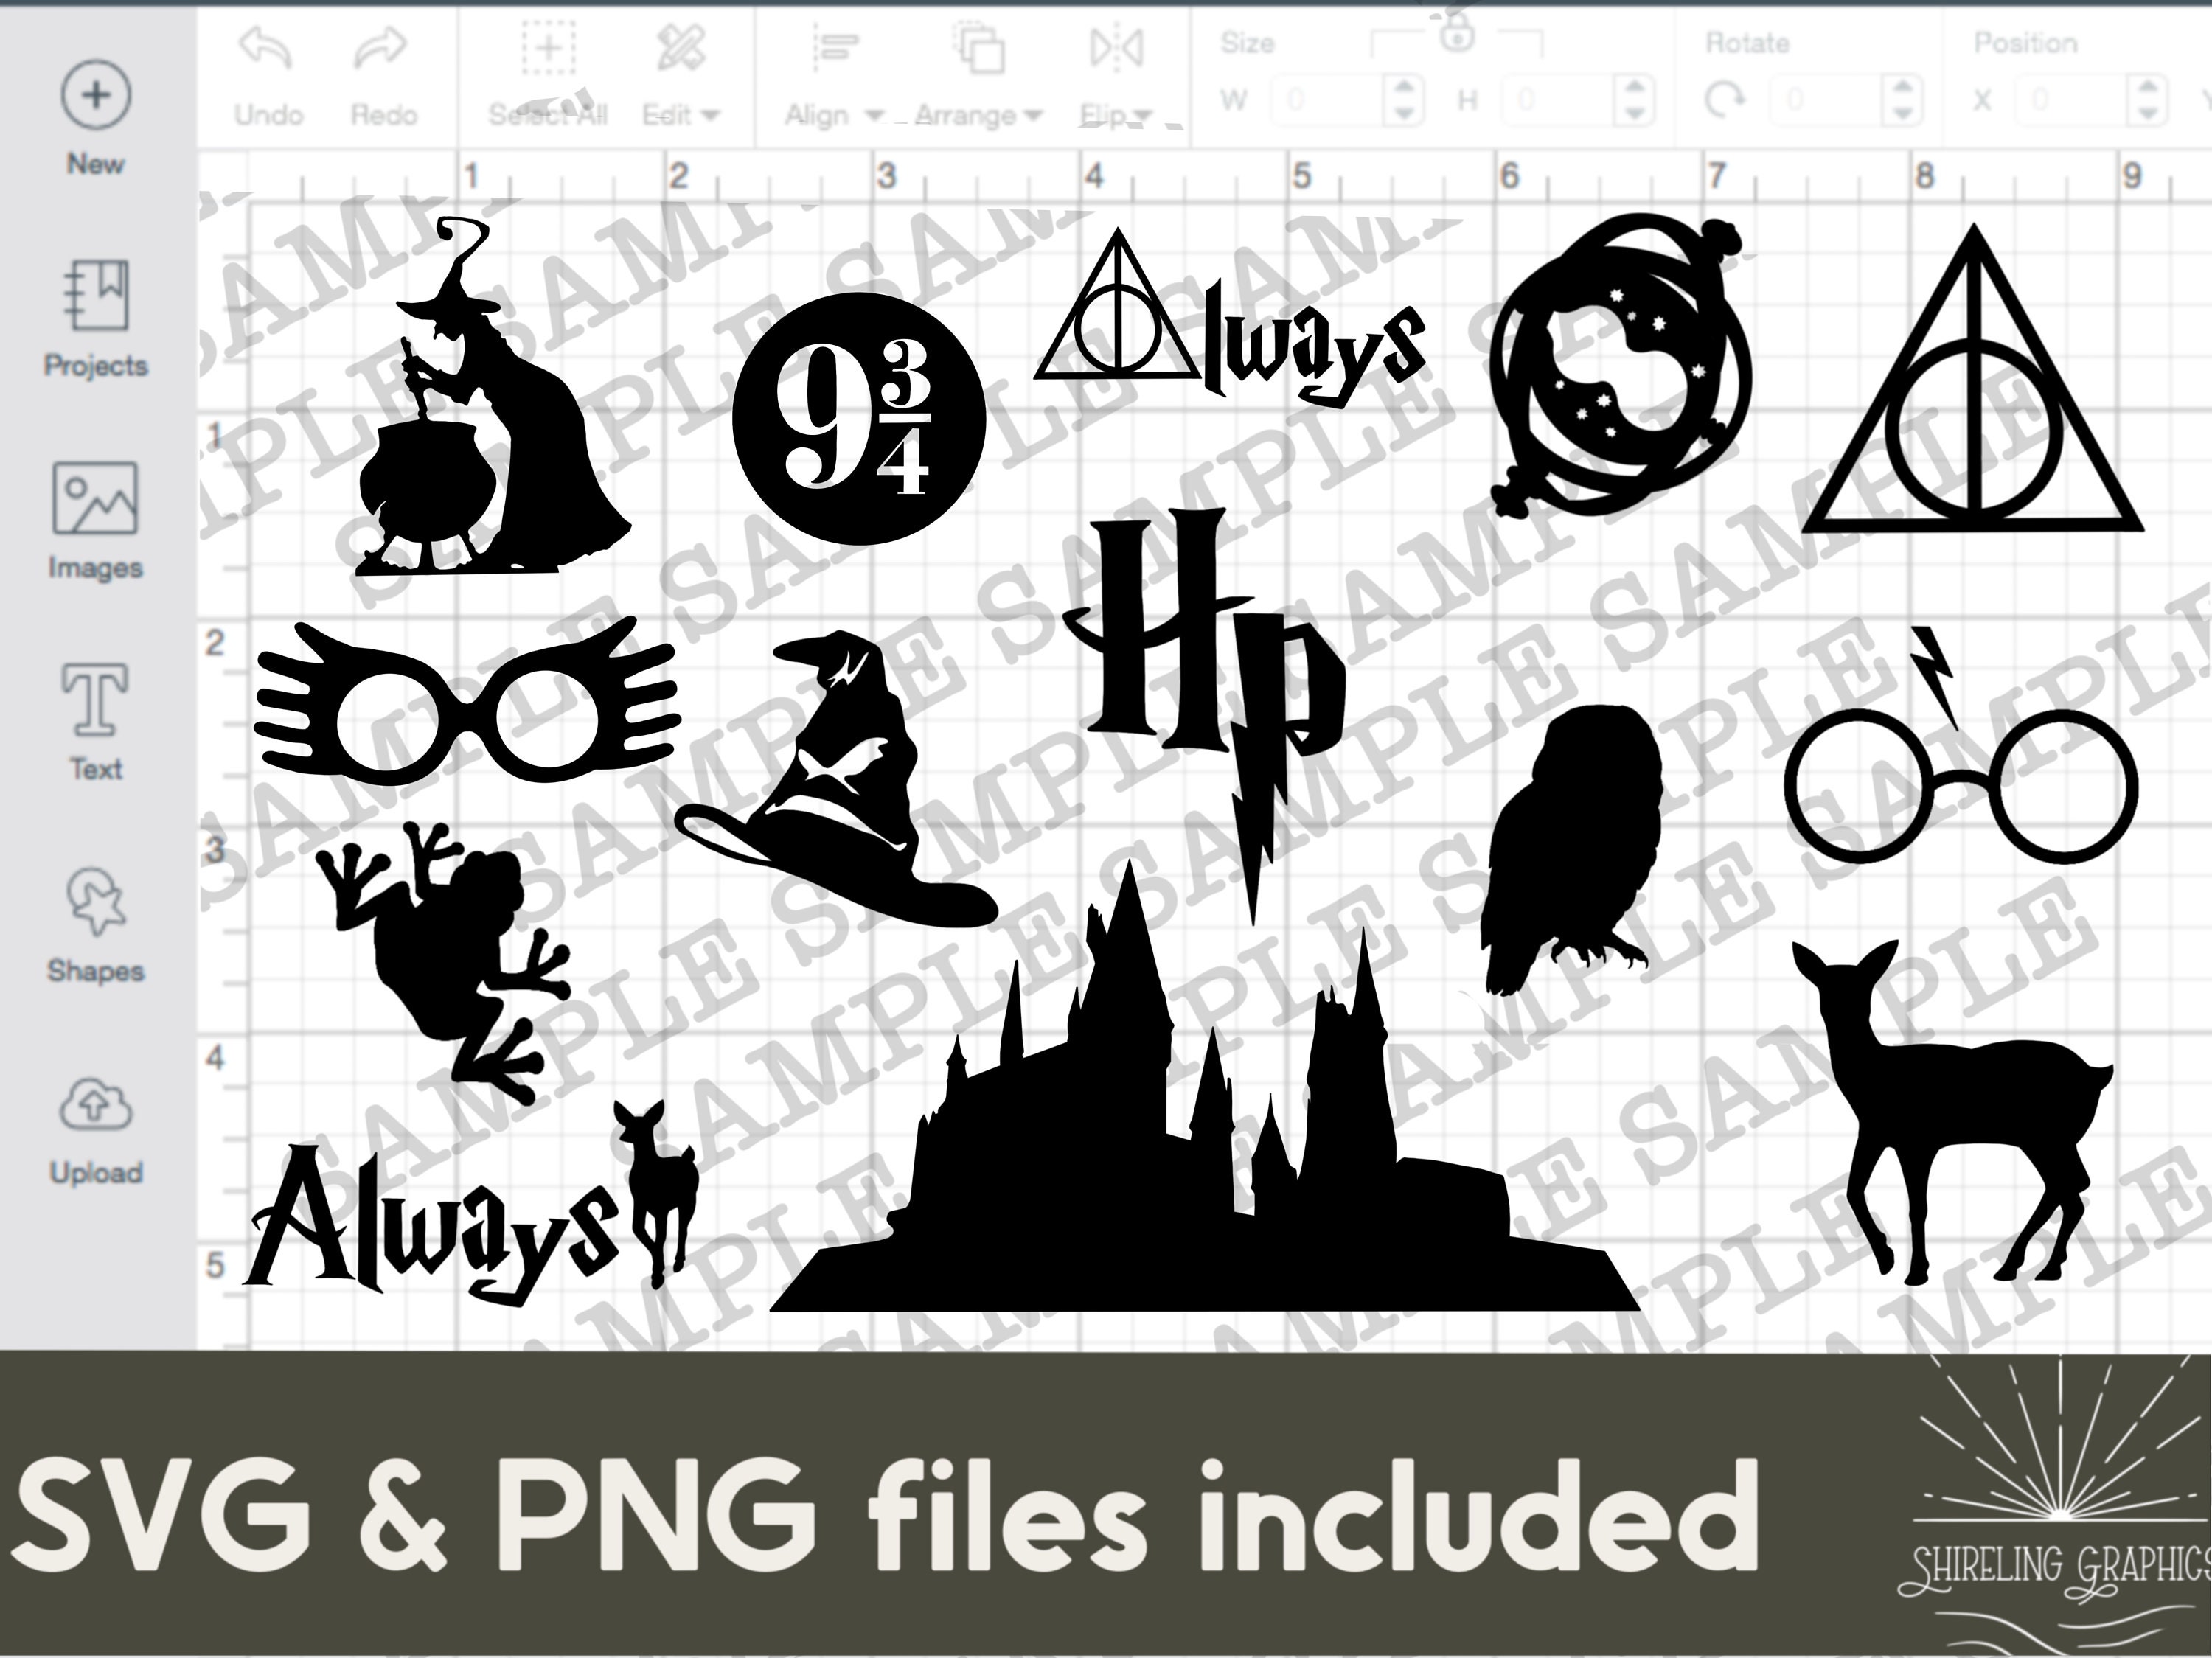 Itty Bitty Harry Potter Glasses Vinyl Sticker Laptop and Water